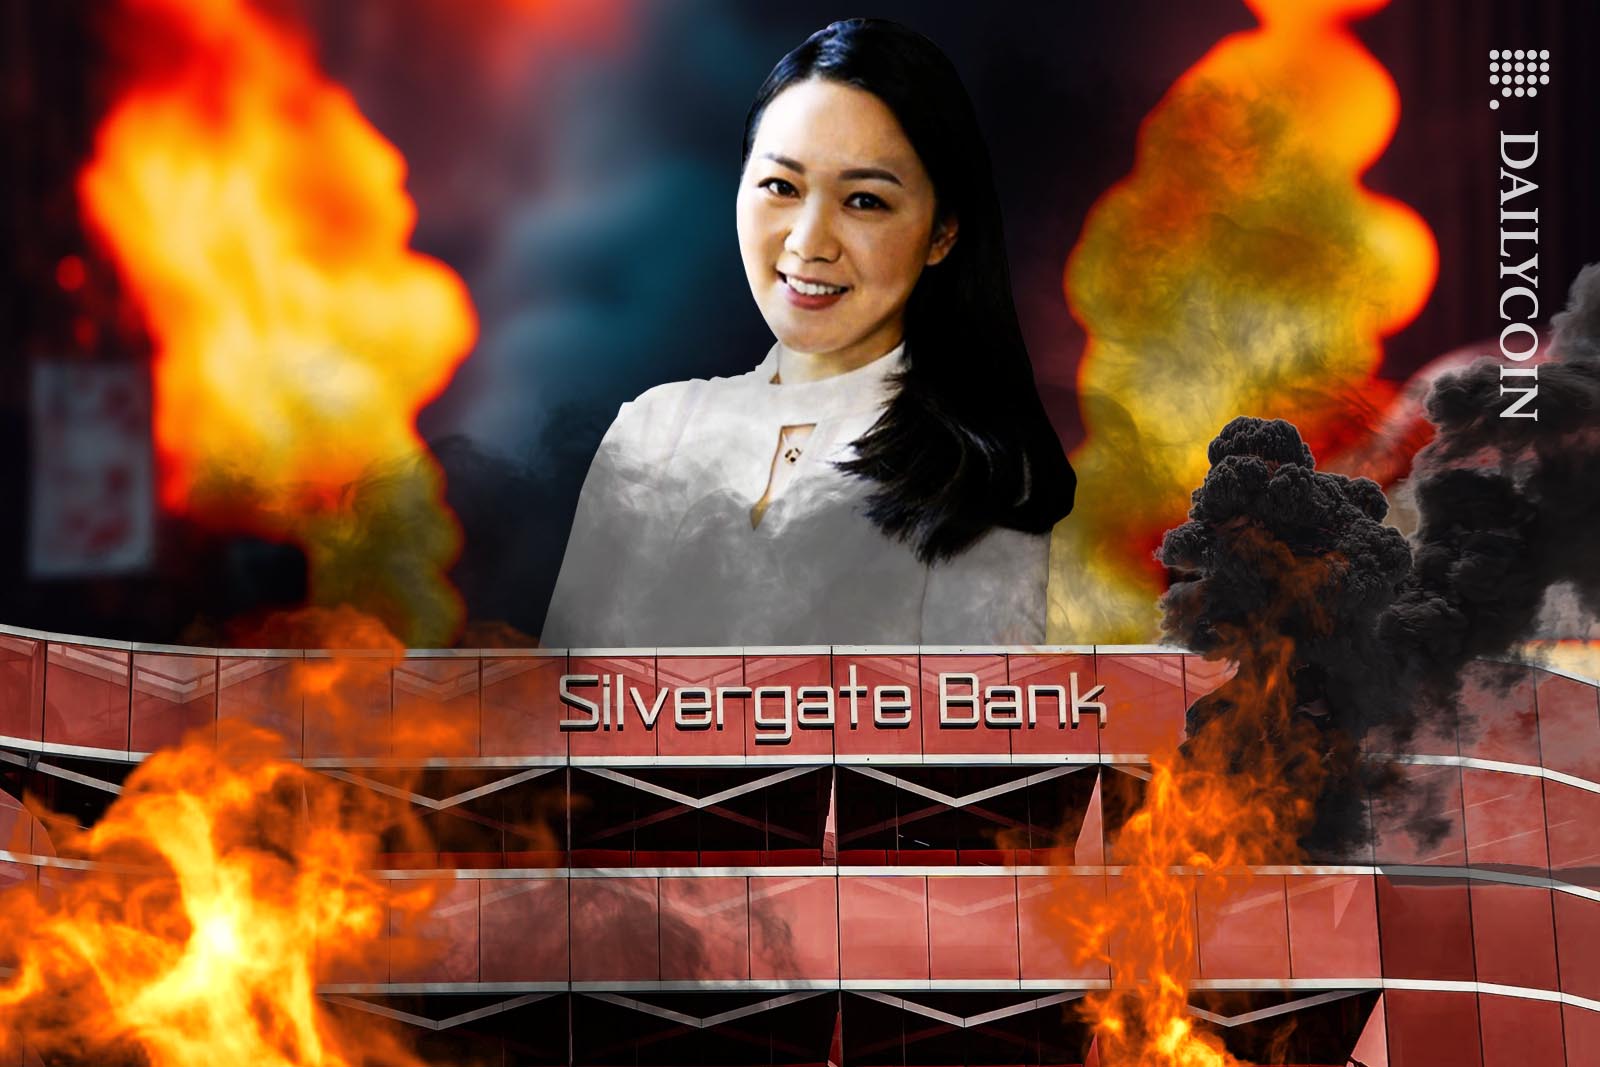 Guangjing Chen of Binance standing behind the burning building of Silverate Bank.